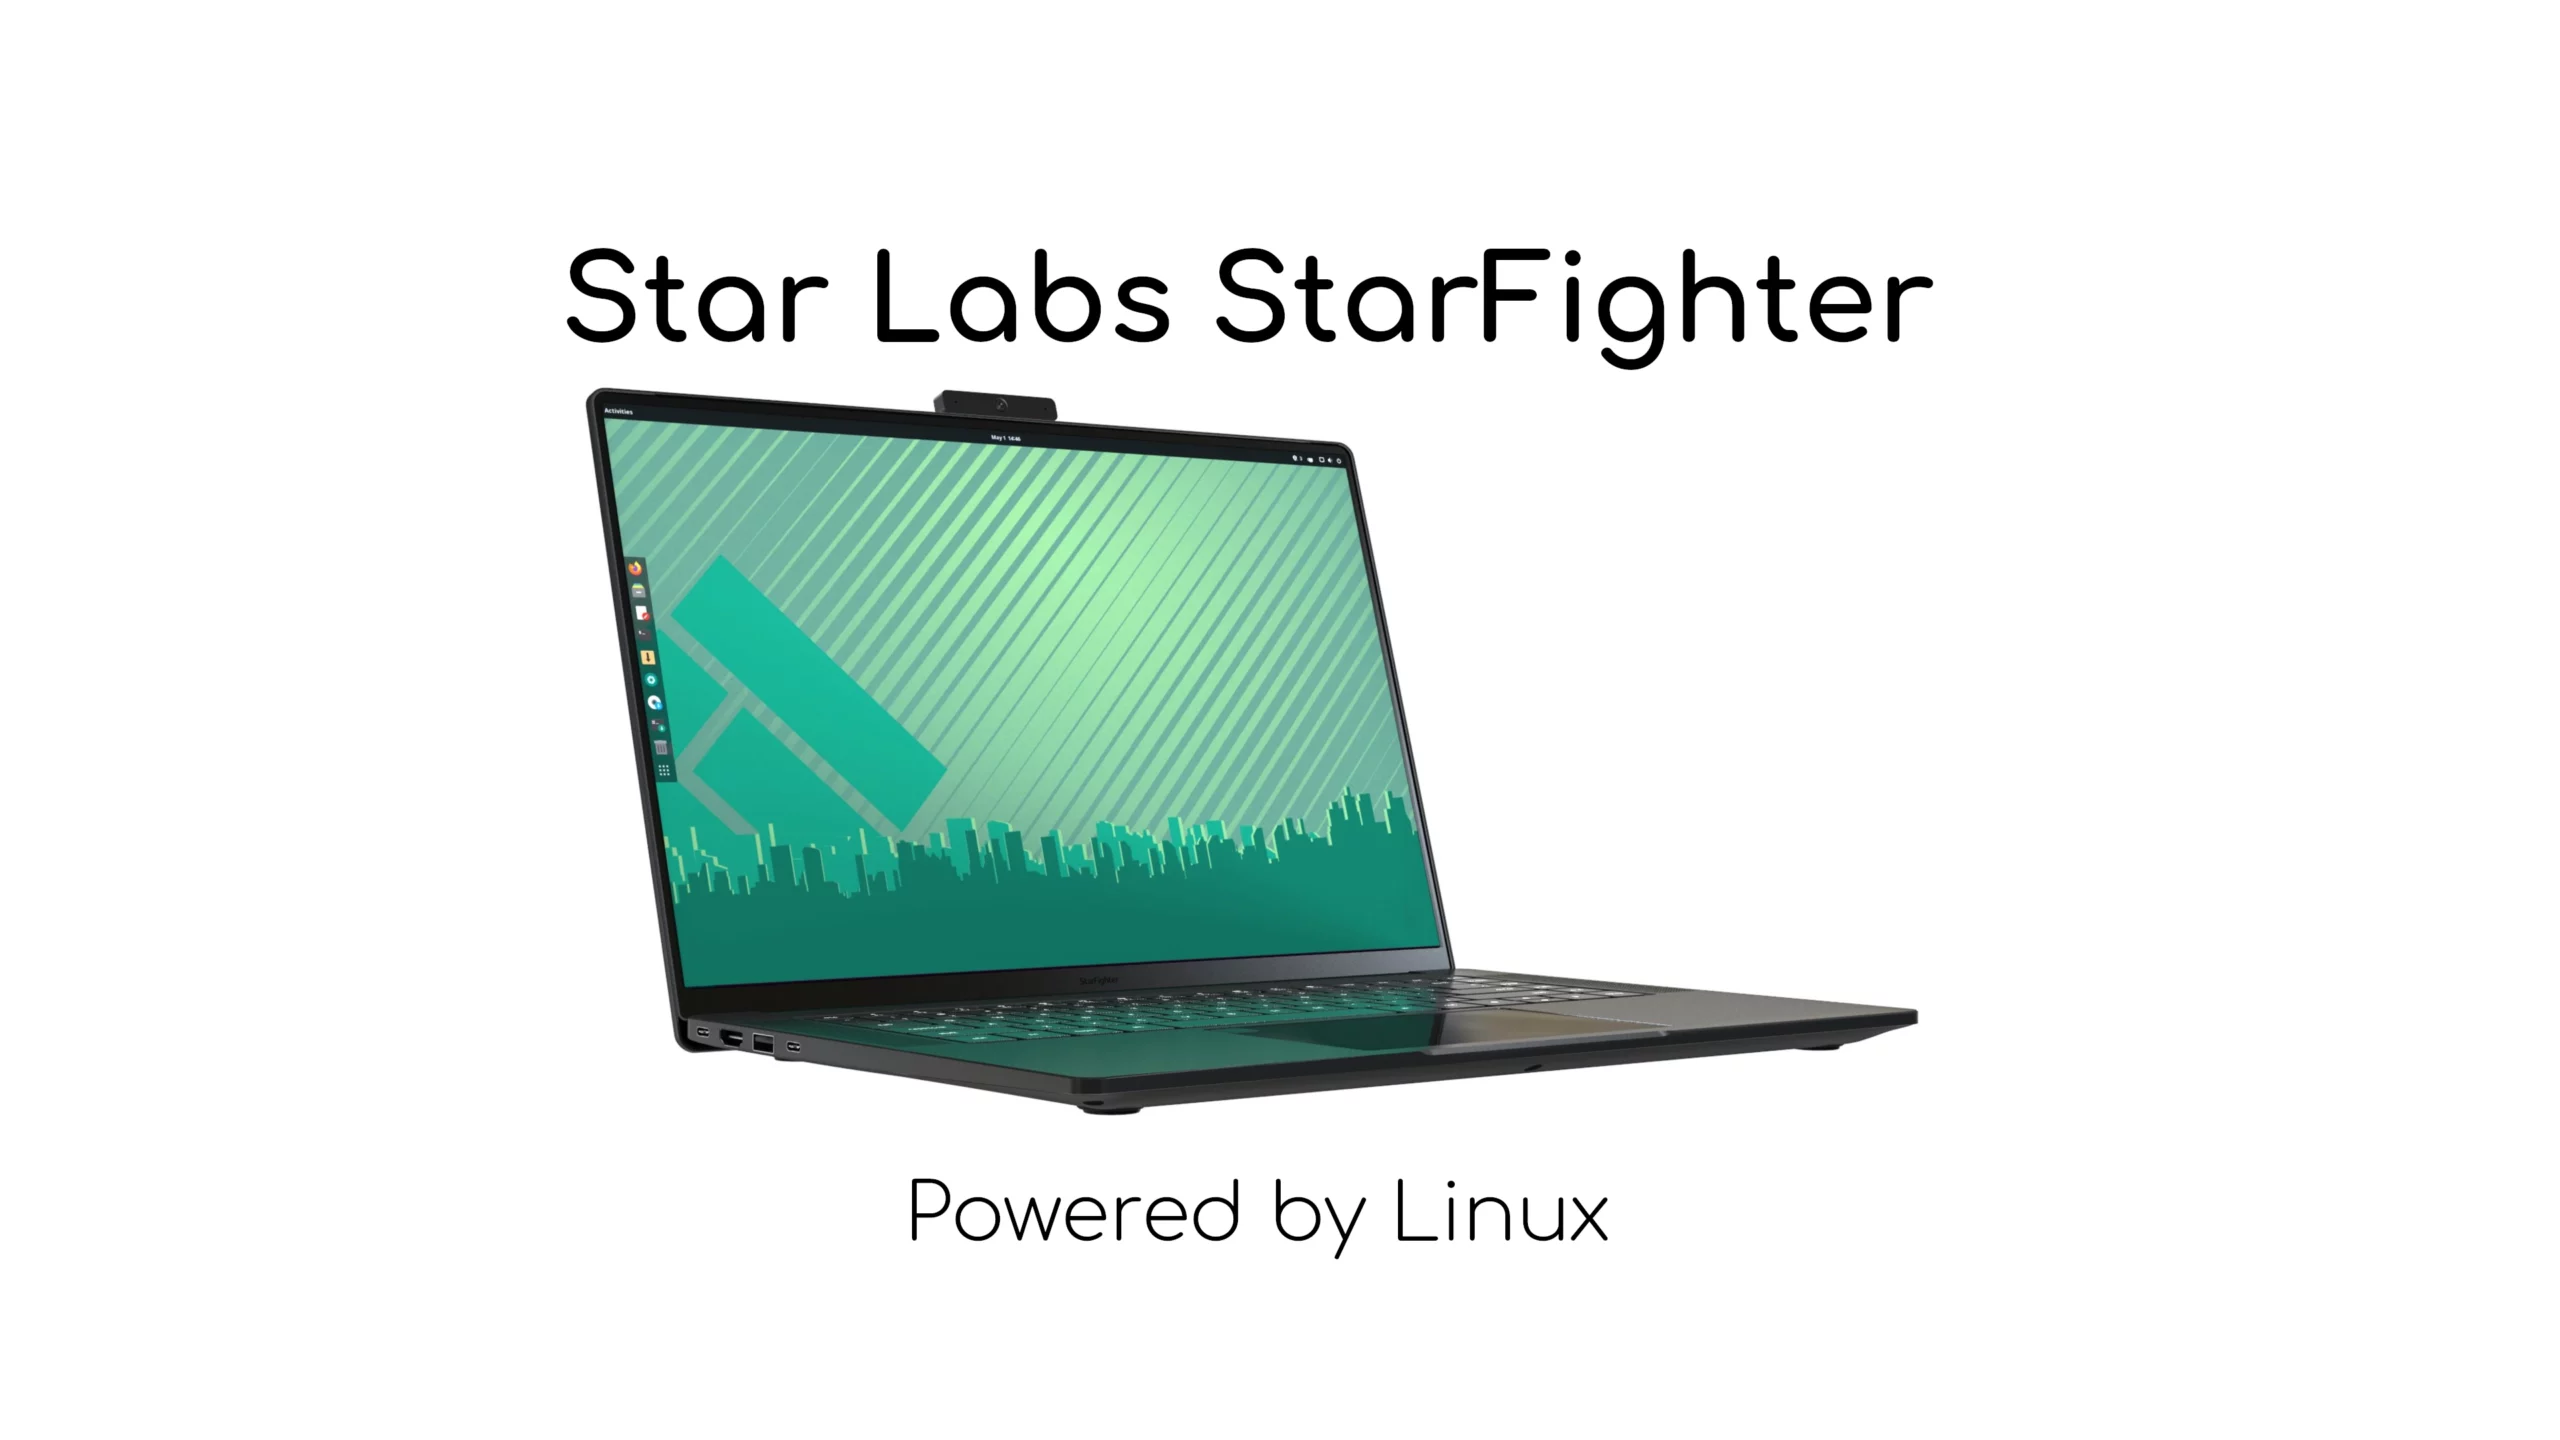 Star Labs Shares More Details on Its Upcoming StarFighter 4K Linux Laptop